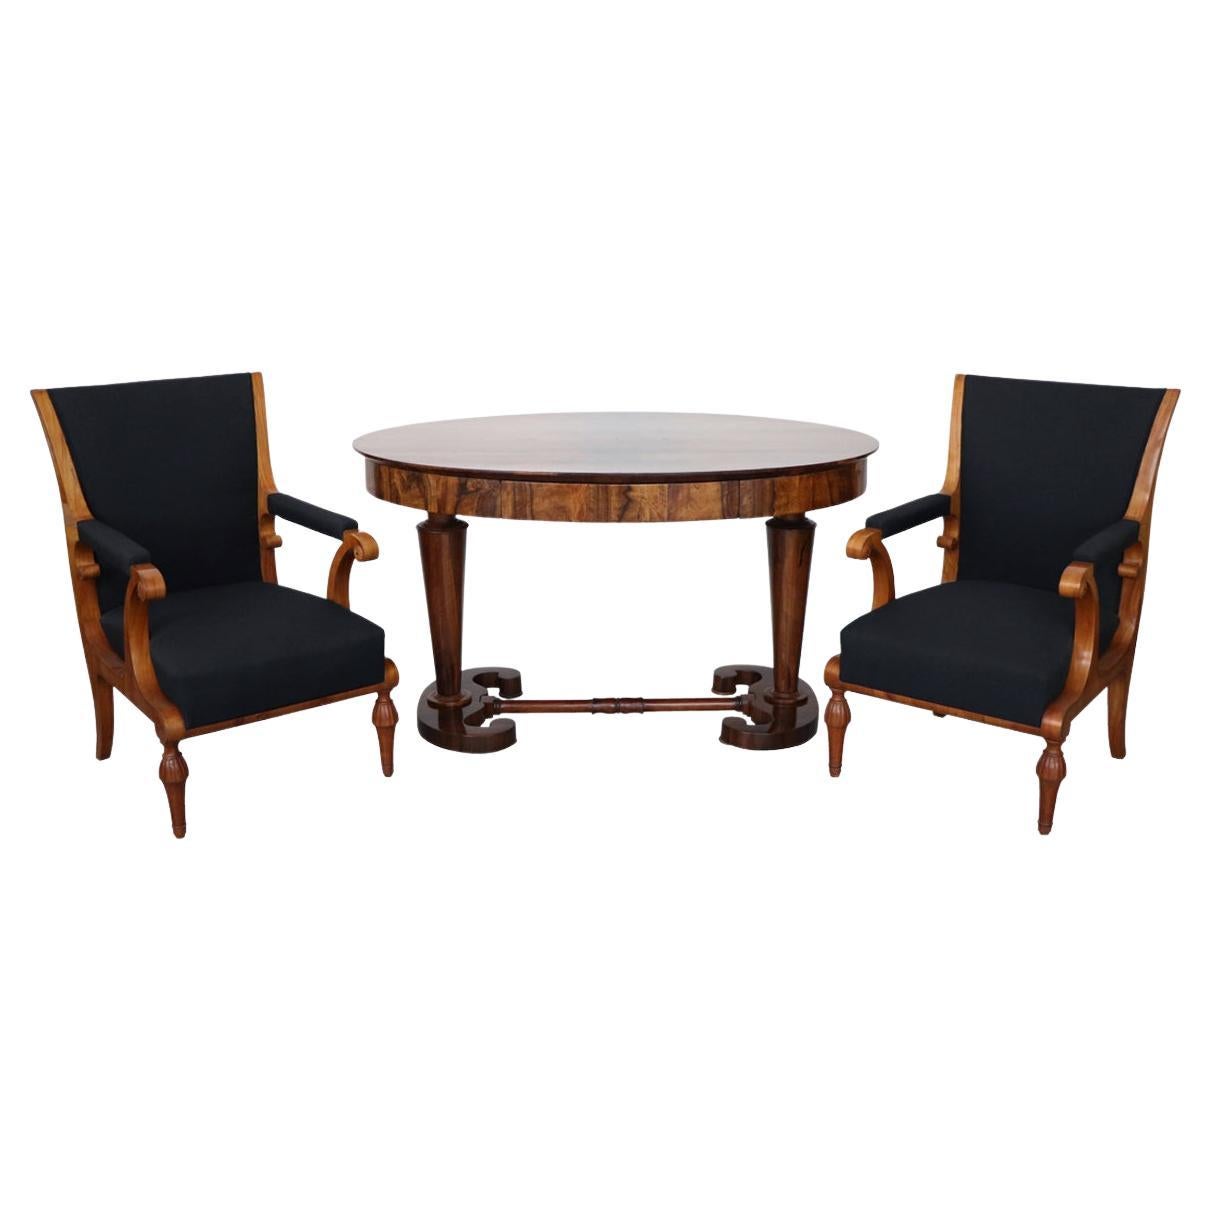 19th Century Fine Biedermeier Set of Two Armchairs and Table. Vienna, c. 1825. For Sale